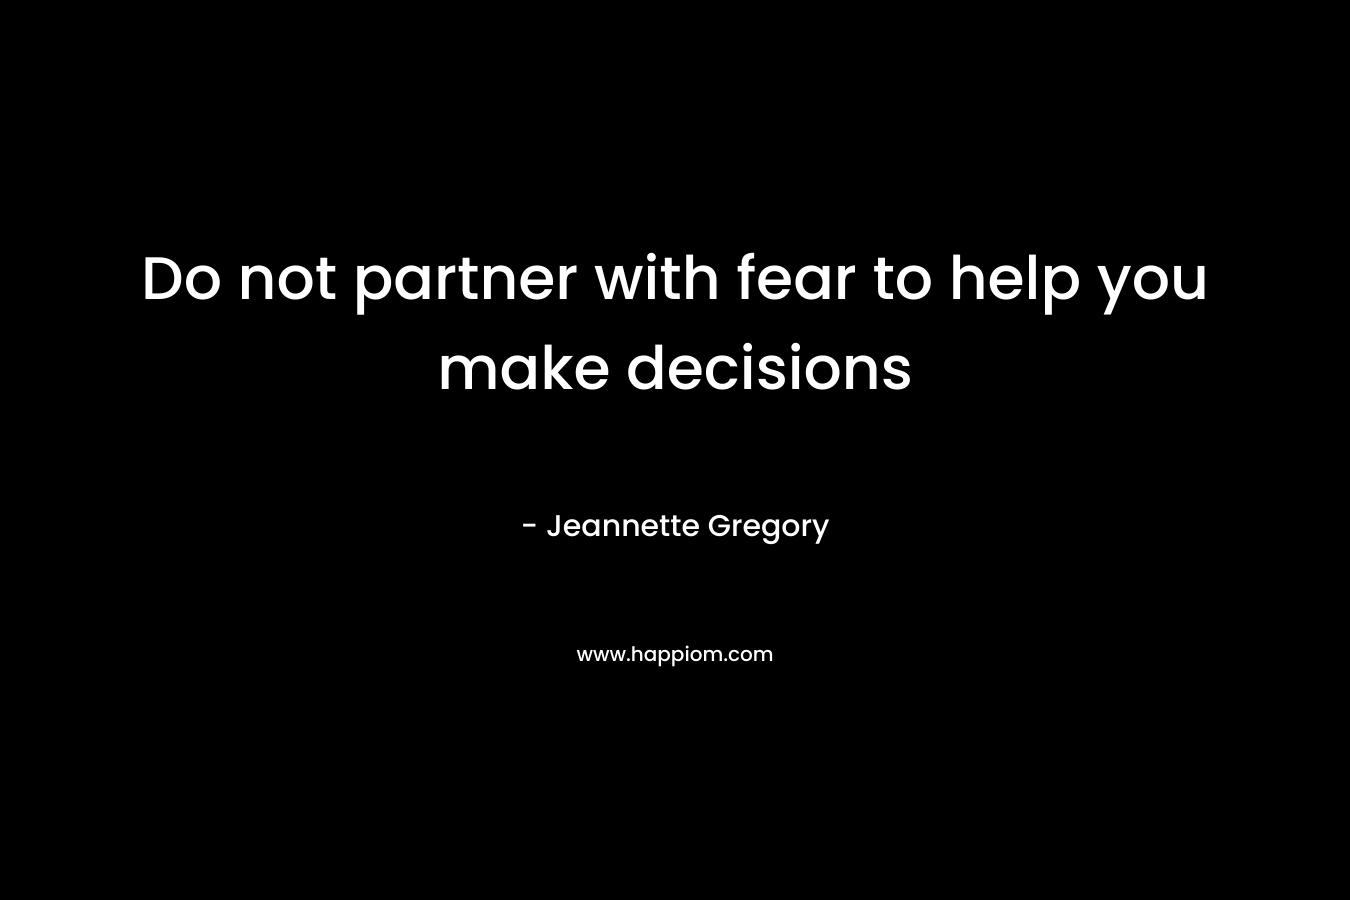 Do not partner with fear to help you make decisions